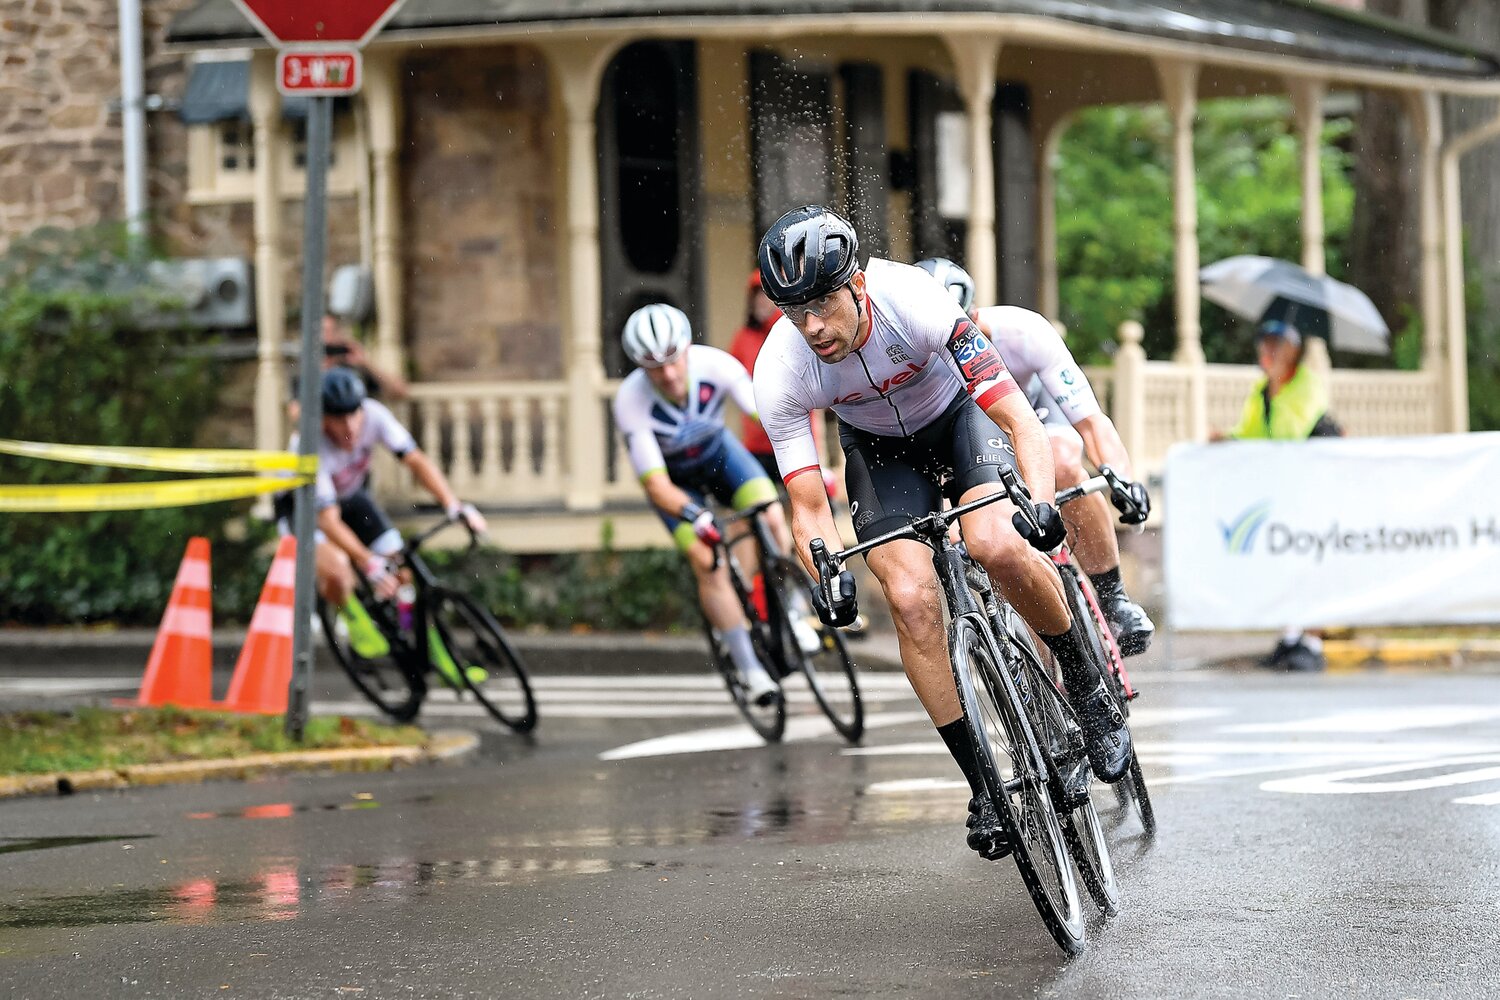 The Masters 45+ race started with heavy rain, making streets dangerous in the turns.